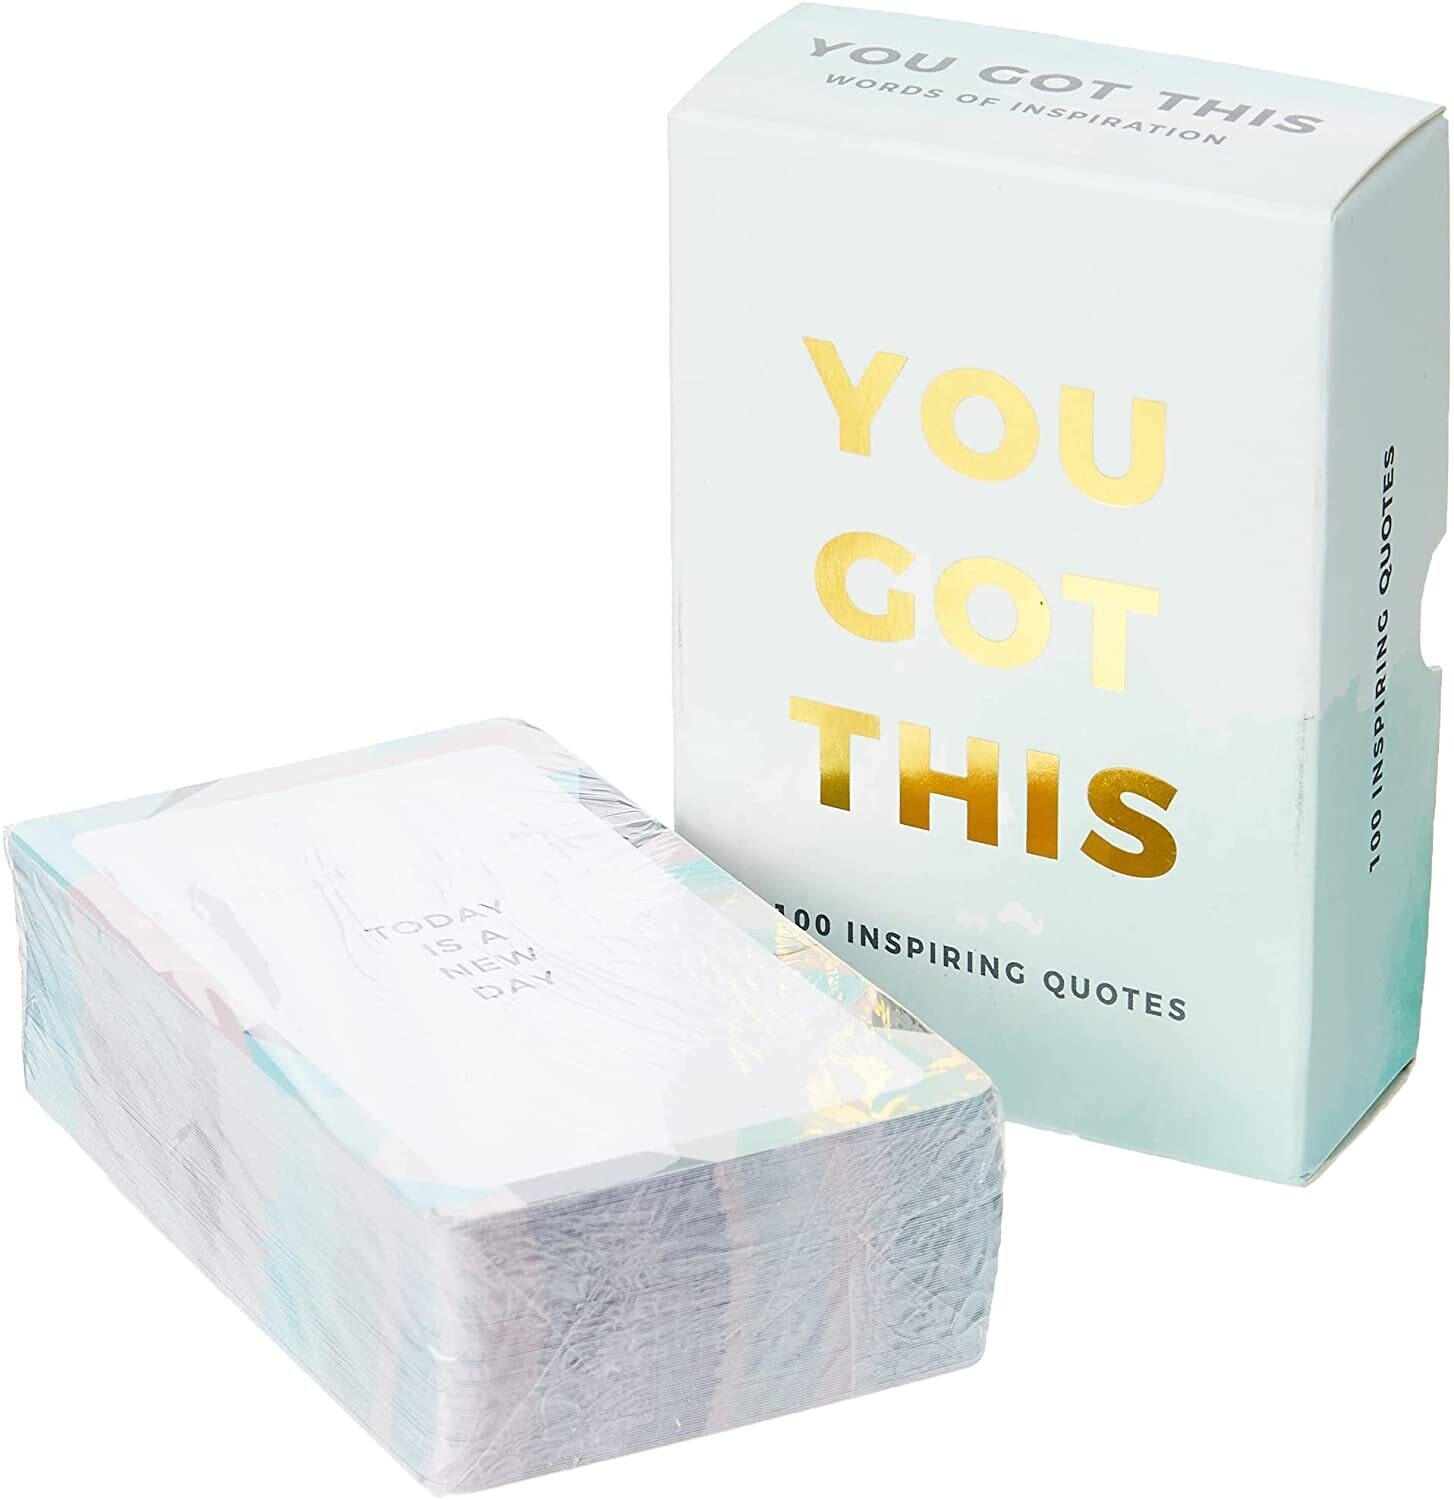 You Got This - Mindfulness Cards